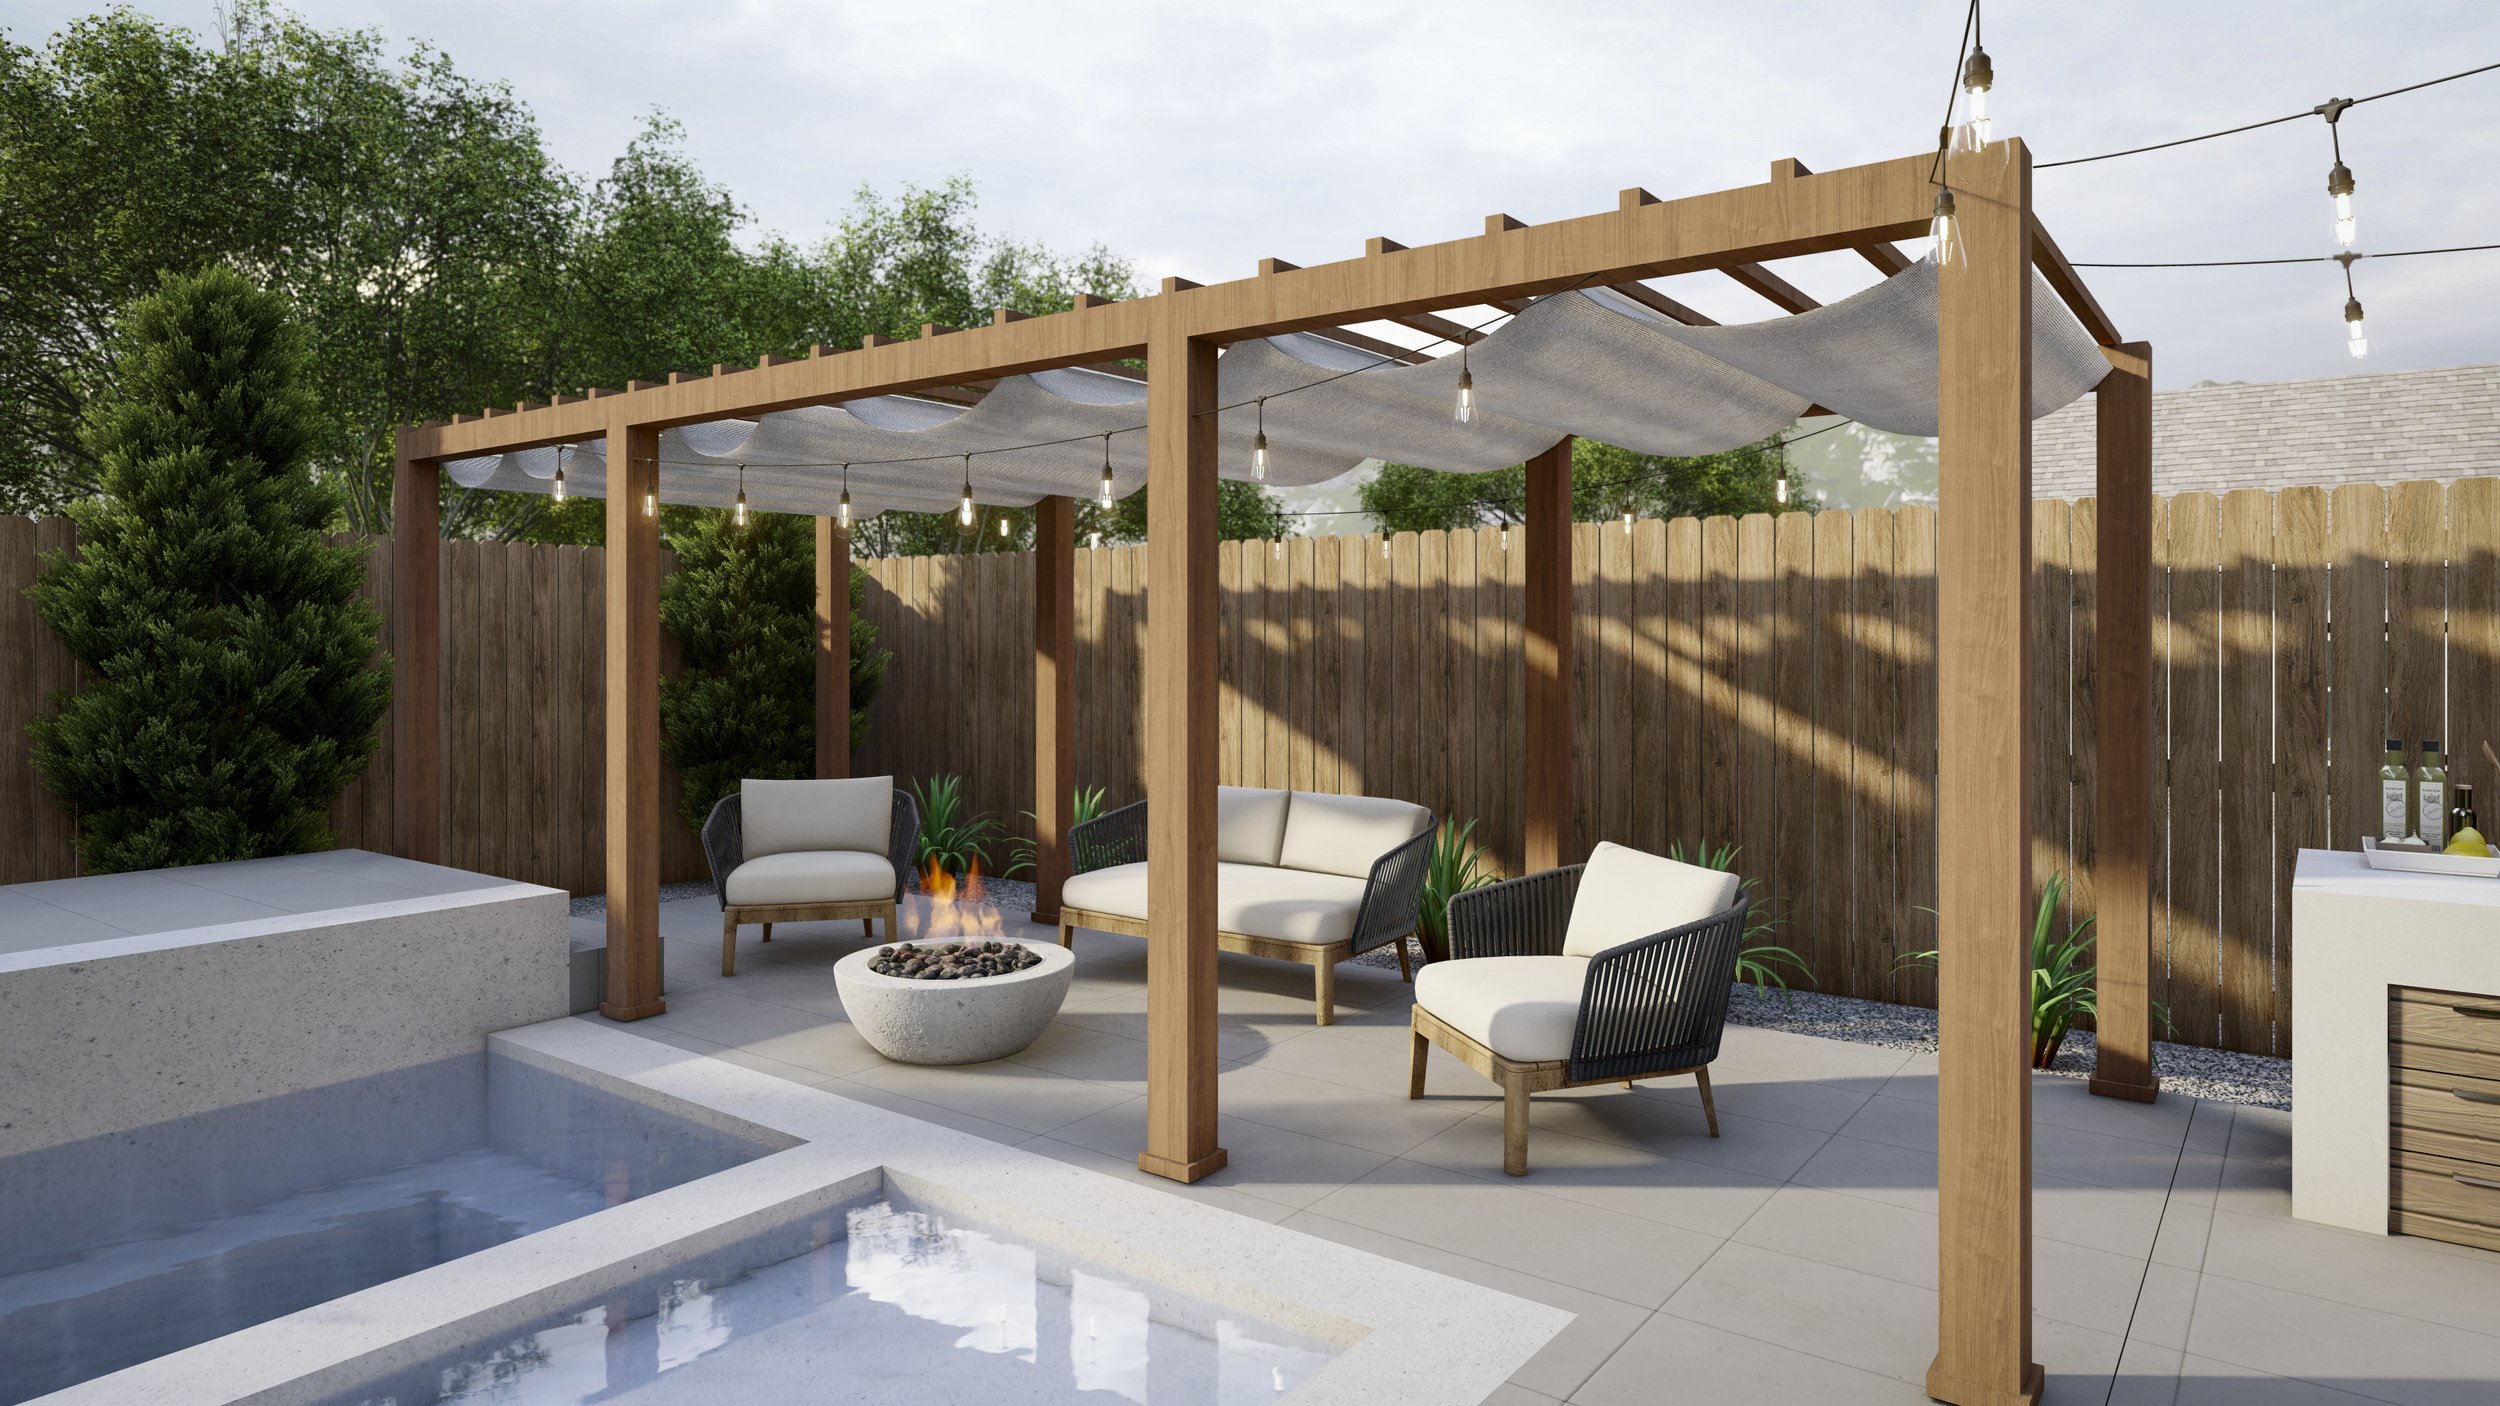 rectangular wooden modern pergola over fire pit seating area next to pool